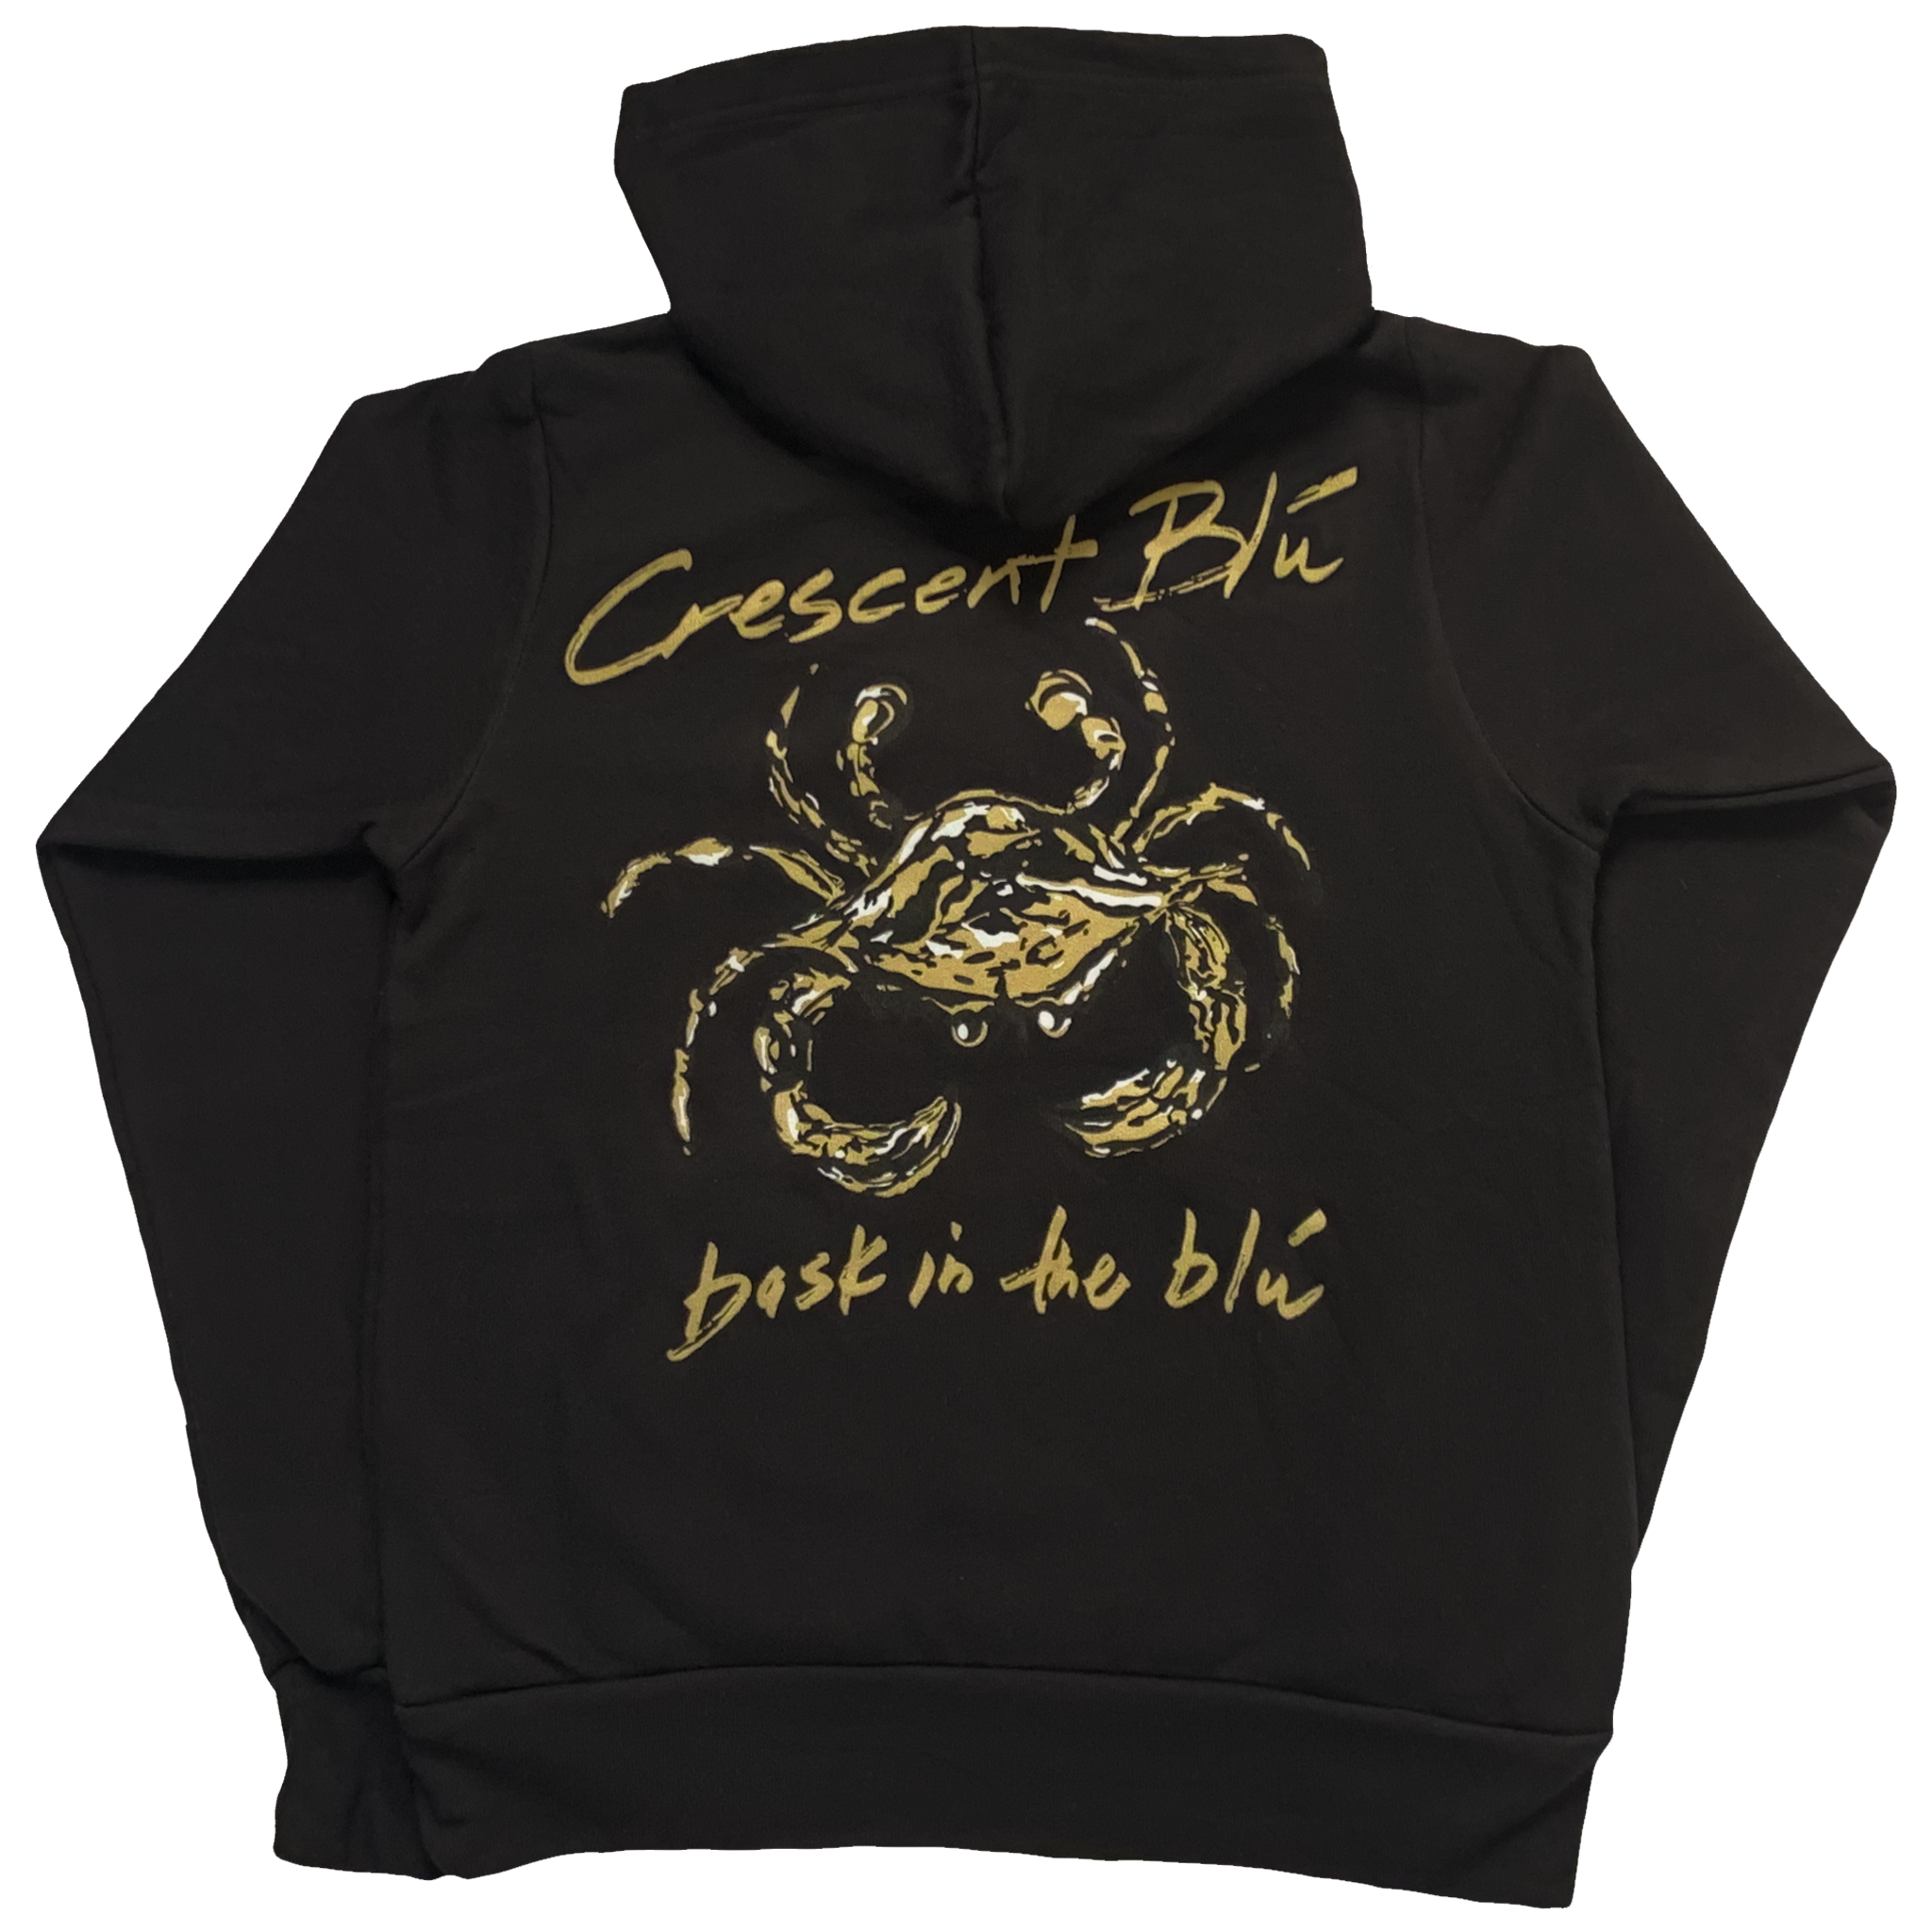 A black, gold, and white crab centered on the back of a black sponge fleece hoodie sweatshirt.  Written in gold above the crab is Crescent Blu, below the crab is bask in the blu written in gold.